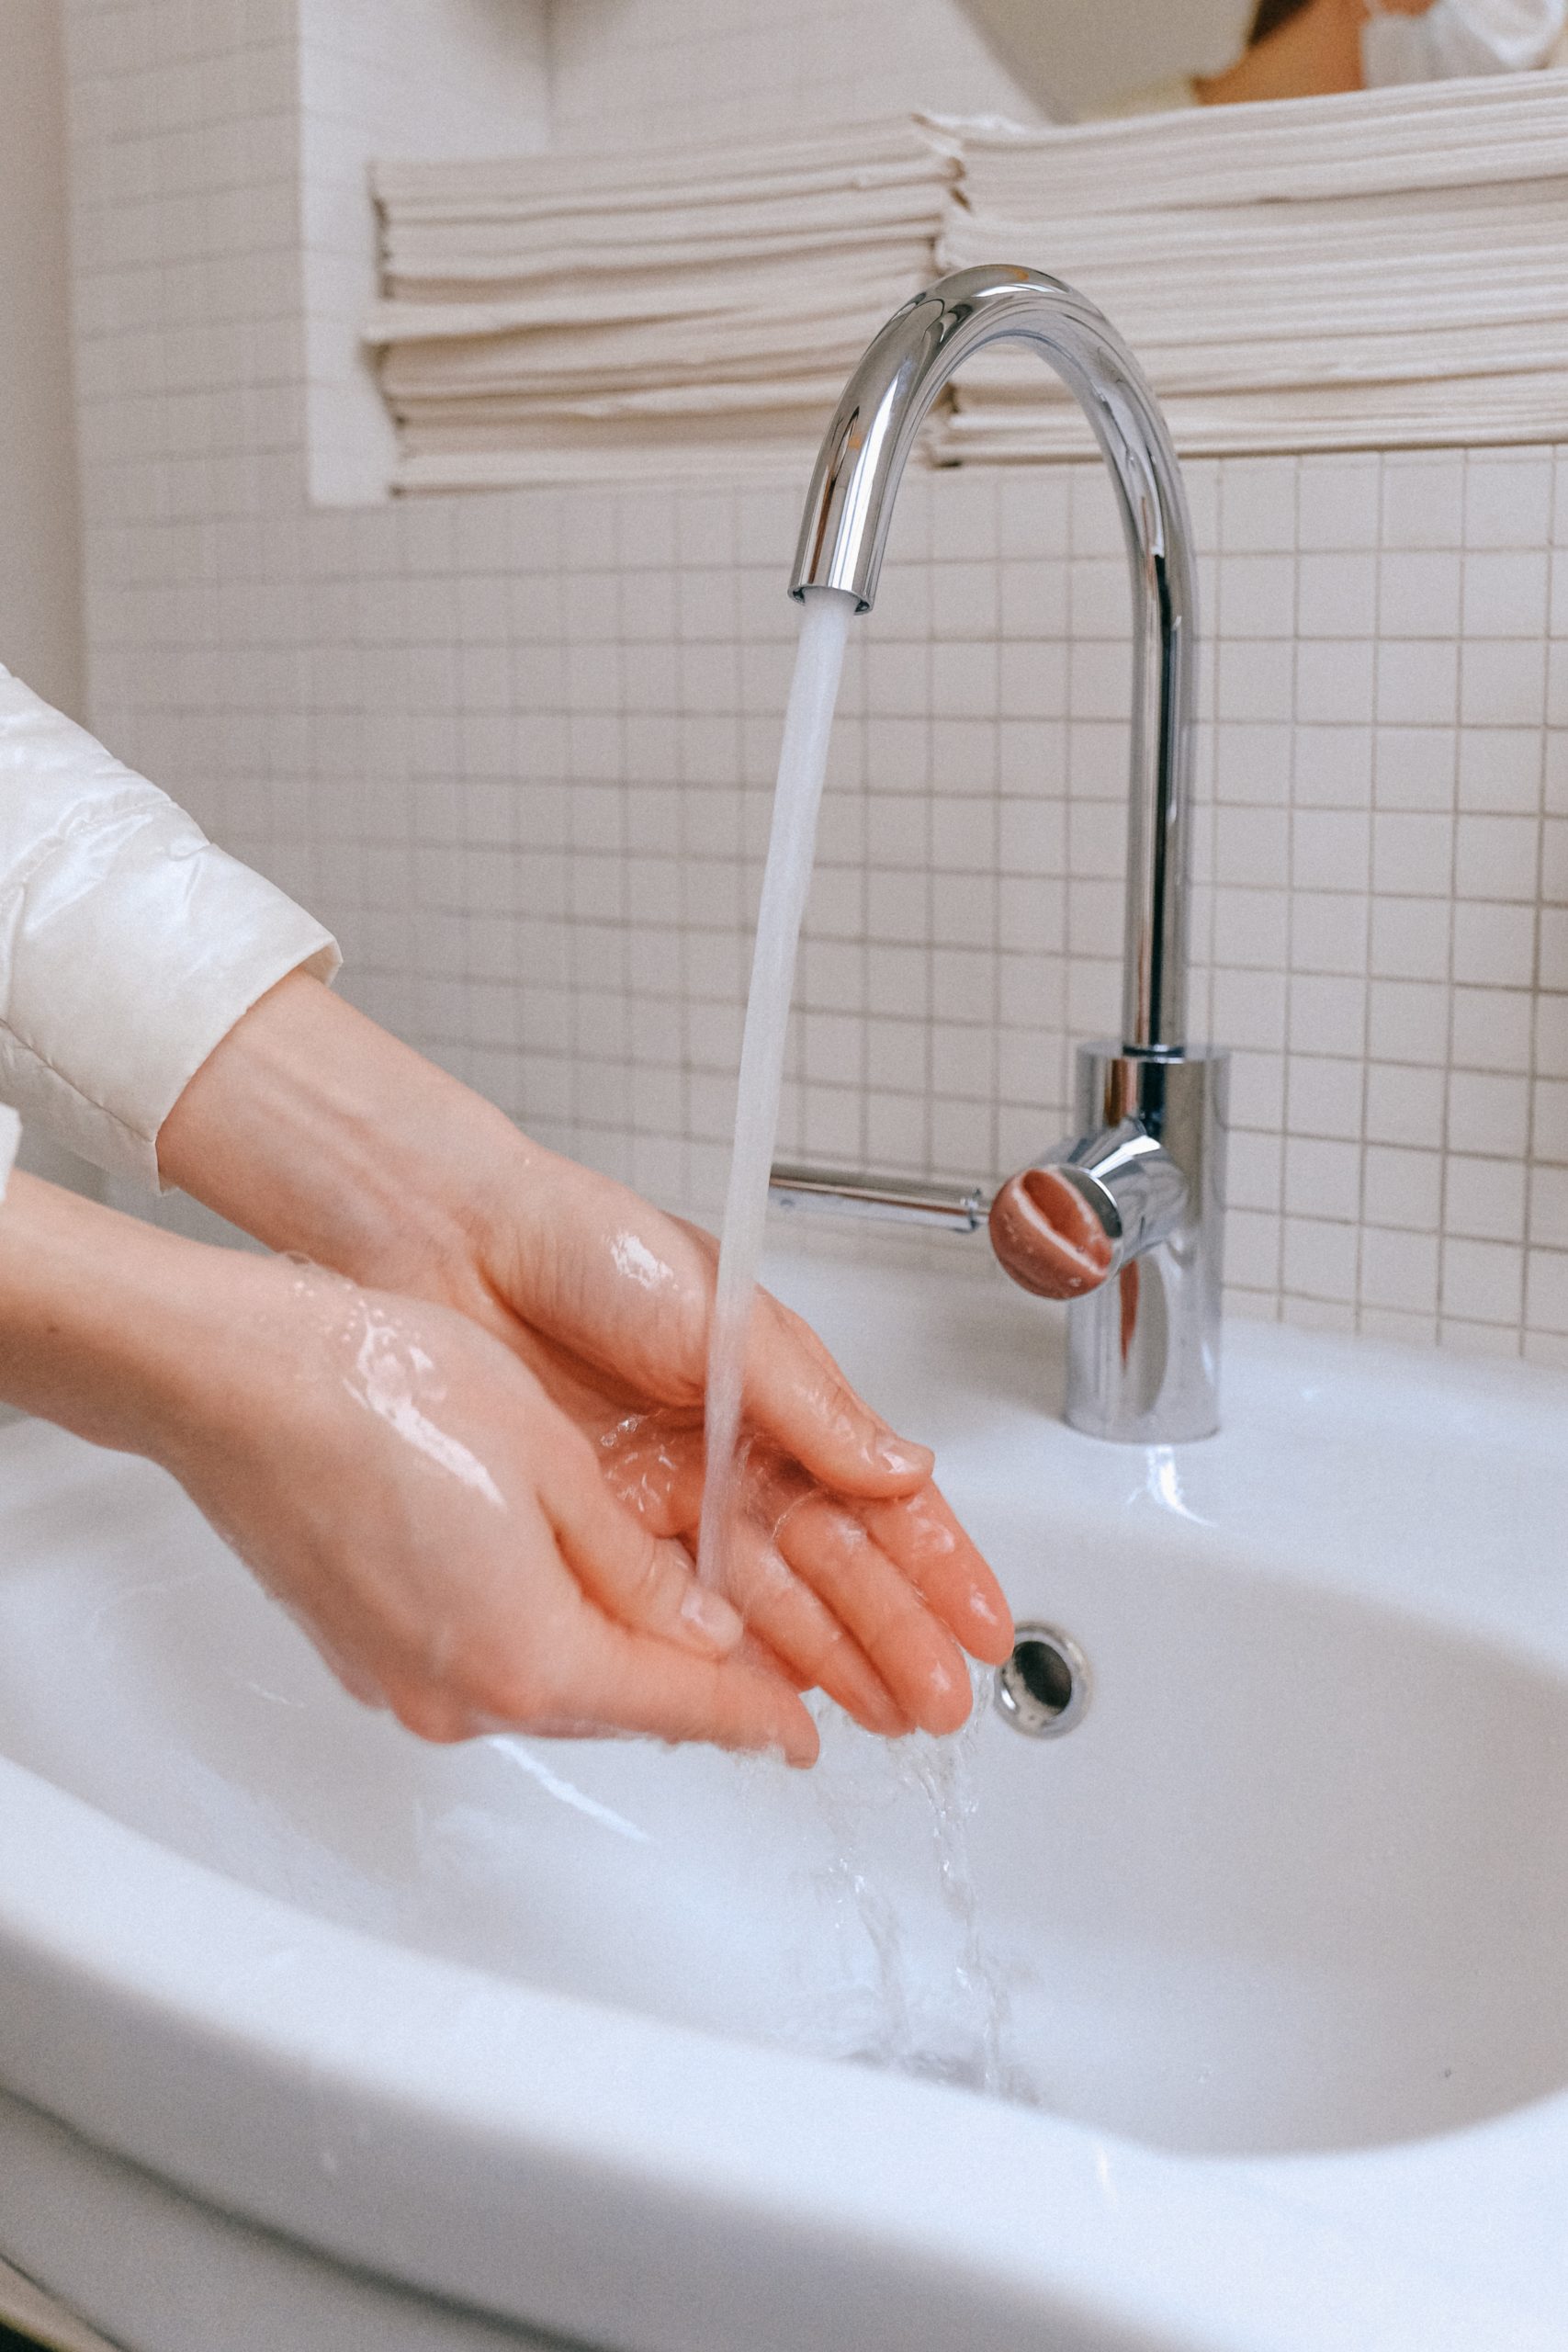 person practicing effective hand hygiene